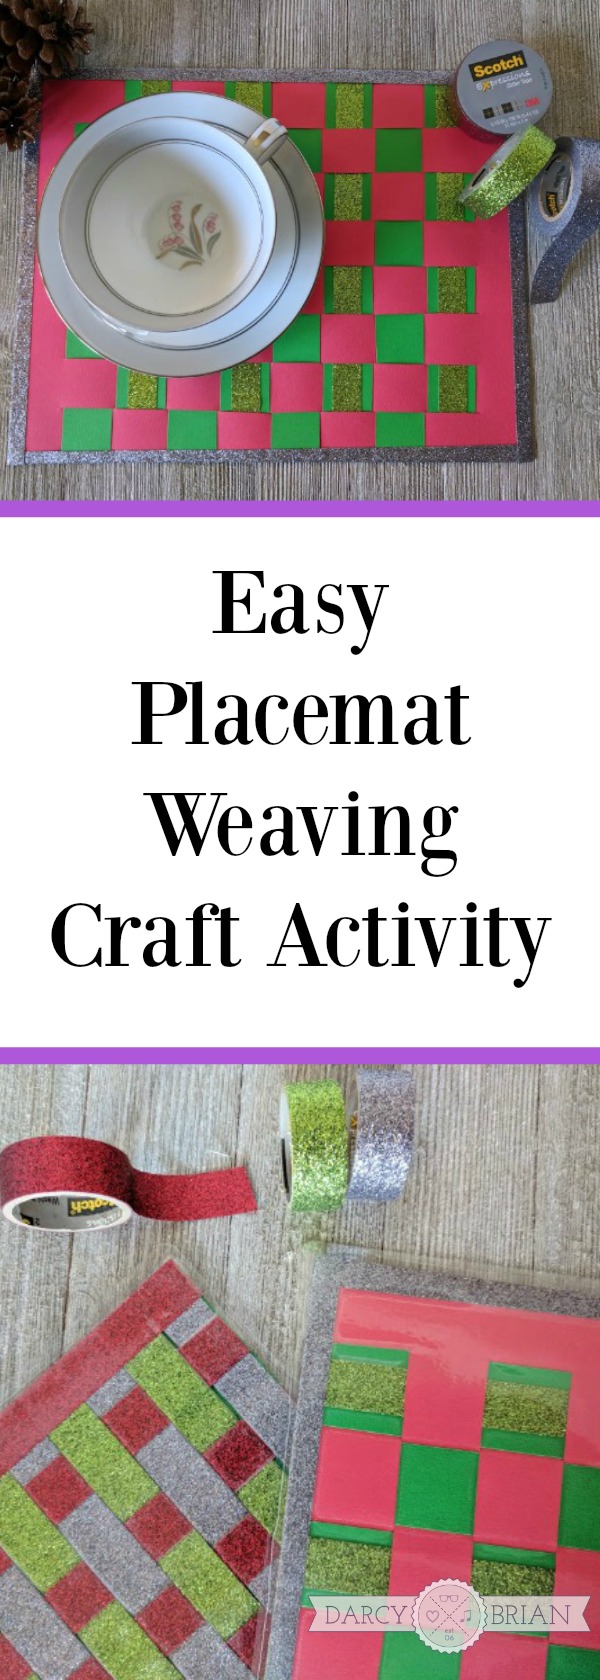 [AD] Love how easy and affordable this glittery placemat craft activity is! Let the kids help you create unique placemats to use as part of your holiday table decor. It's a quick craft kids will love working on with you! #EverydayCraftMoments #CollectiveBias